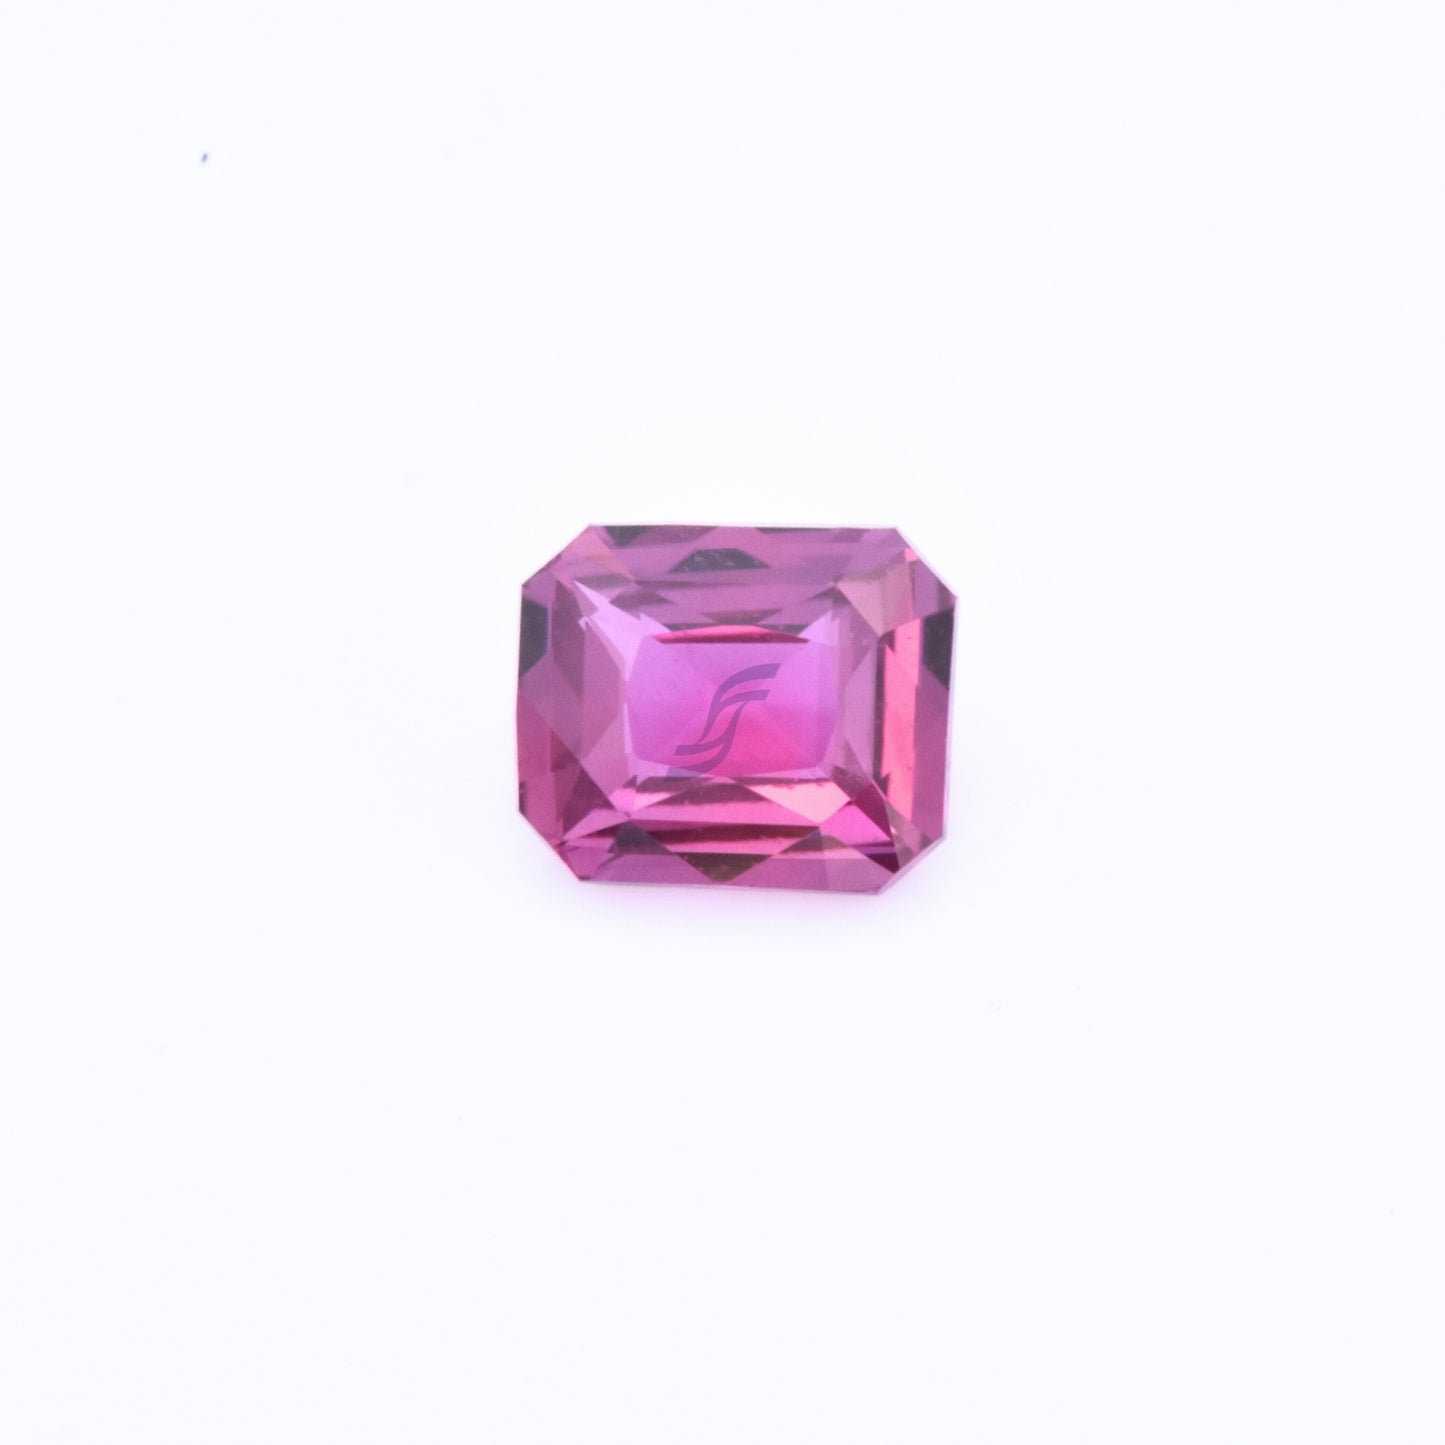 1.01CT Natural Pink Sapphire